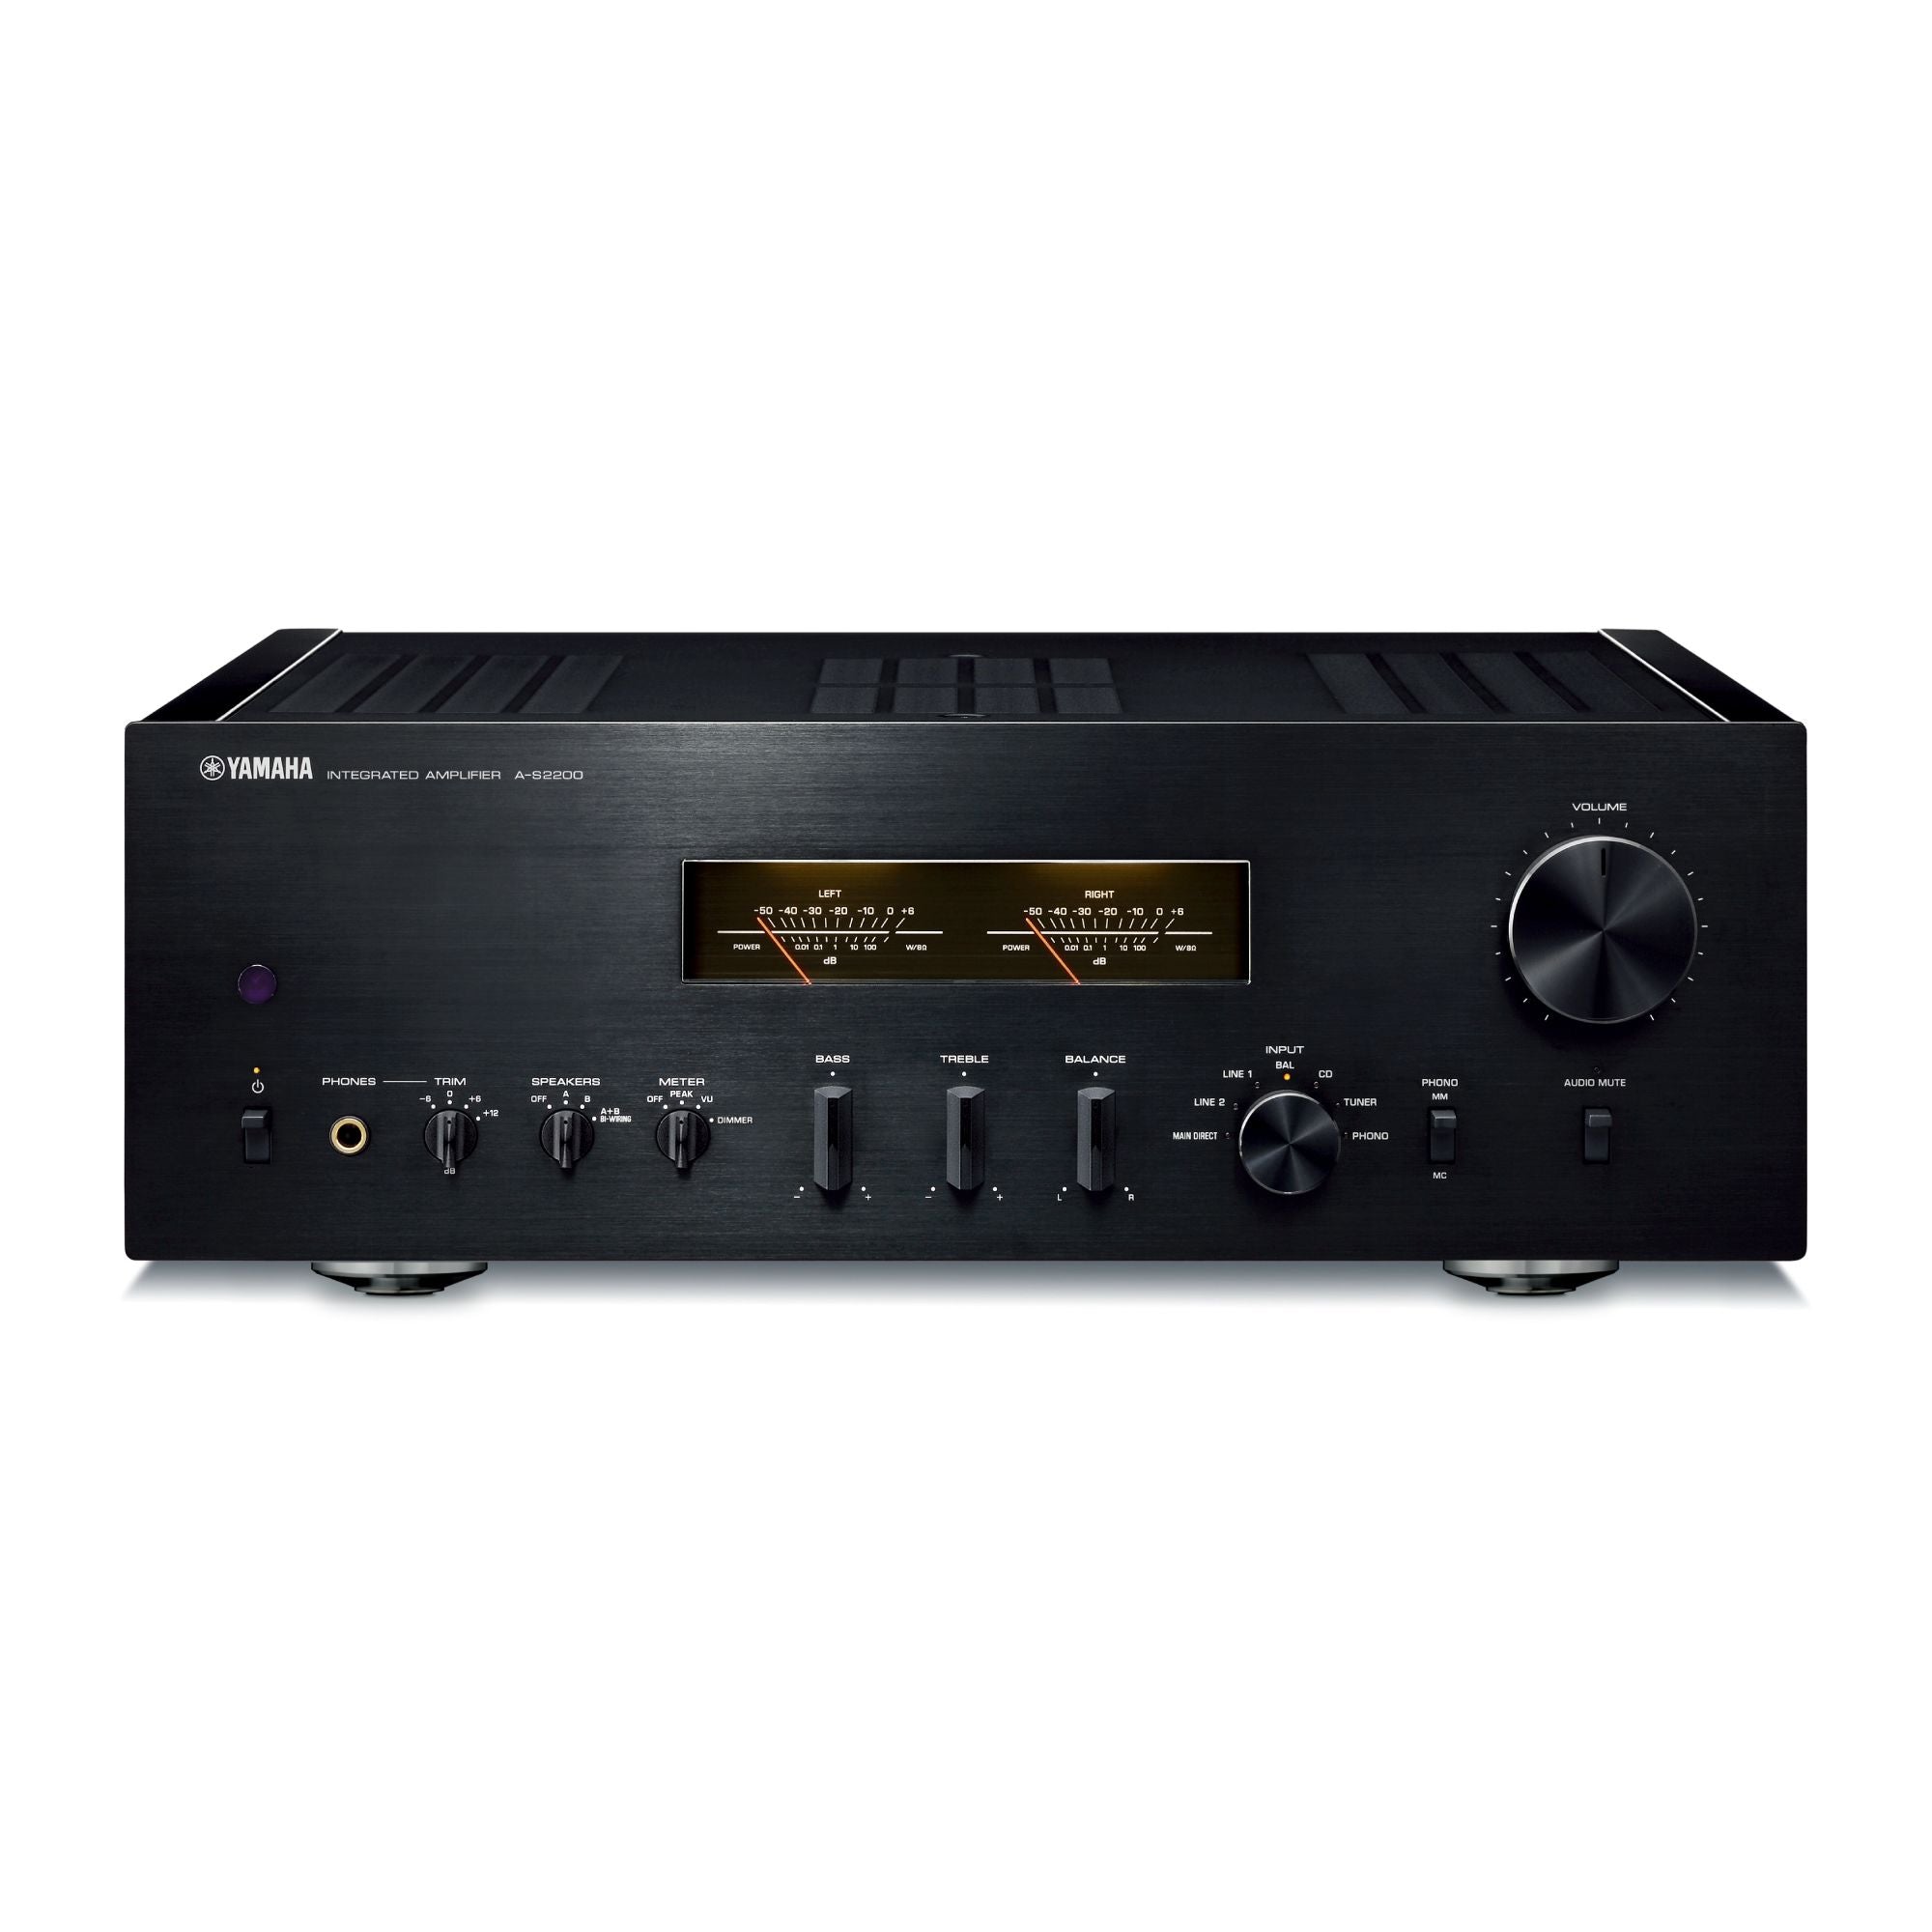 YAMAHA A-S2200 HIGH-END INTERGRATED STEREO AMPLIFIER - SILVER IN STOCK